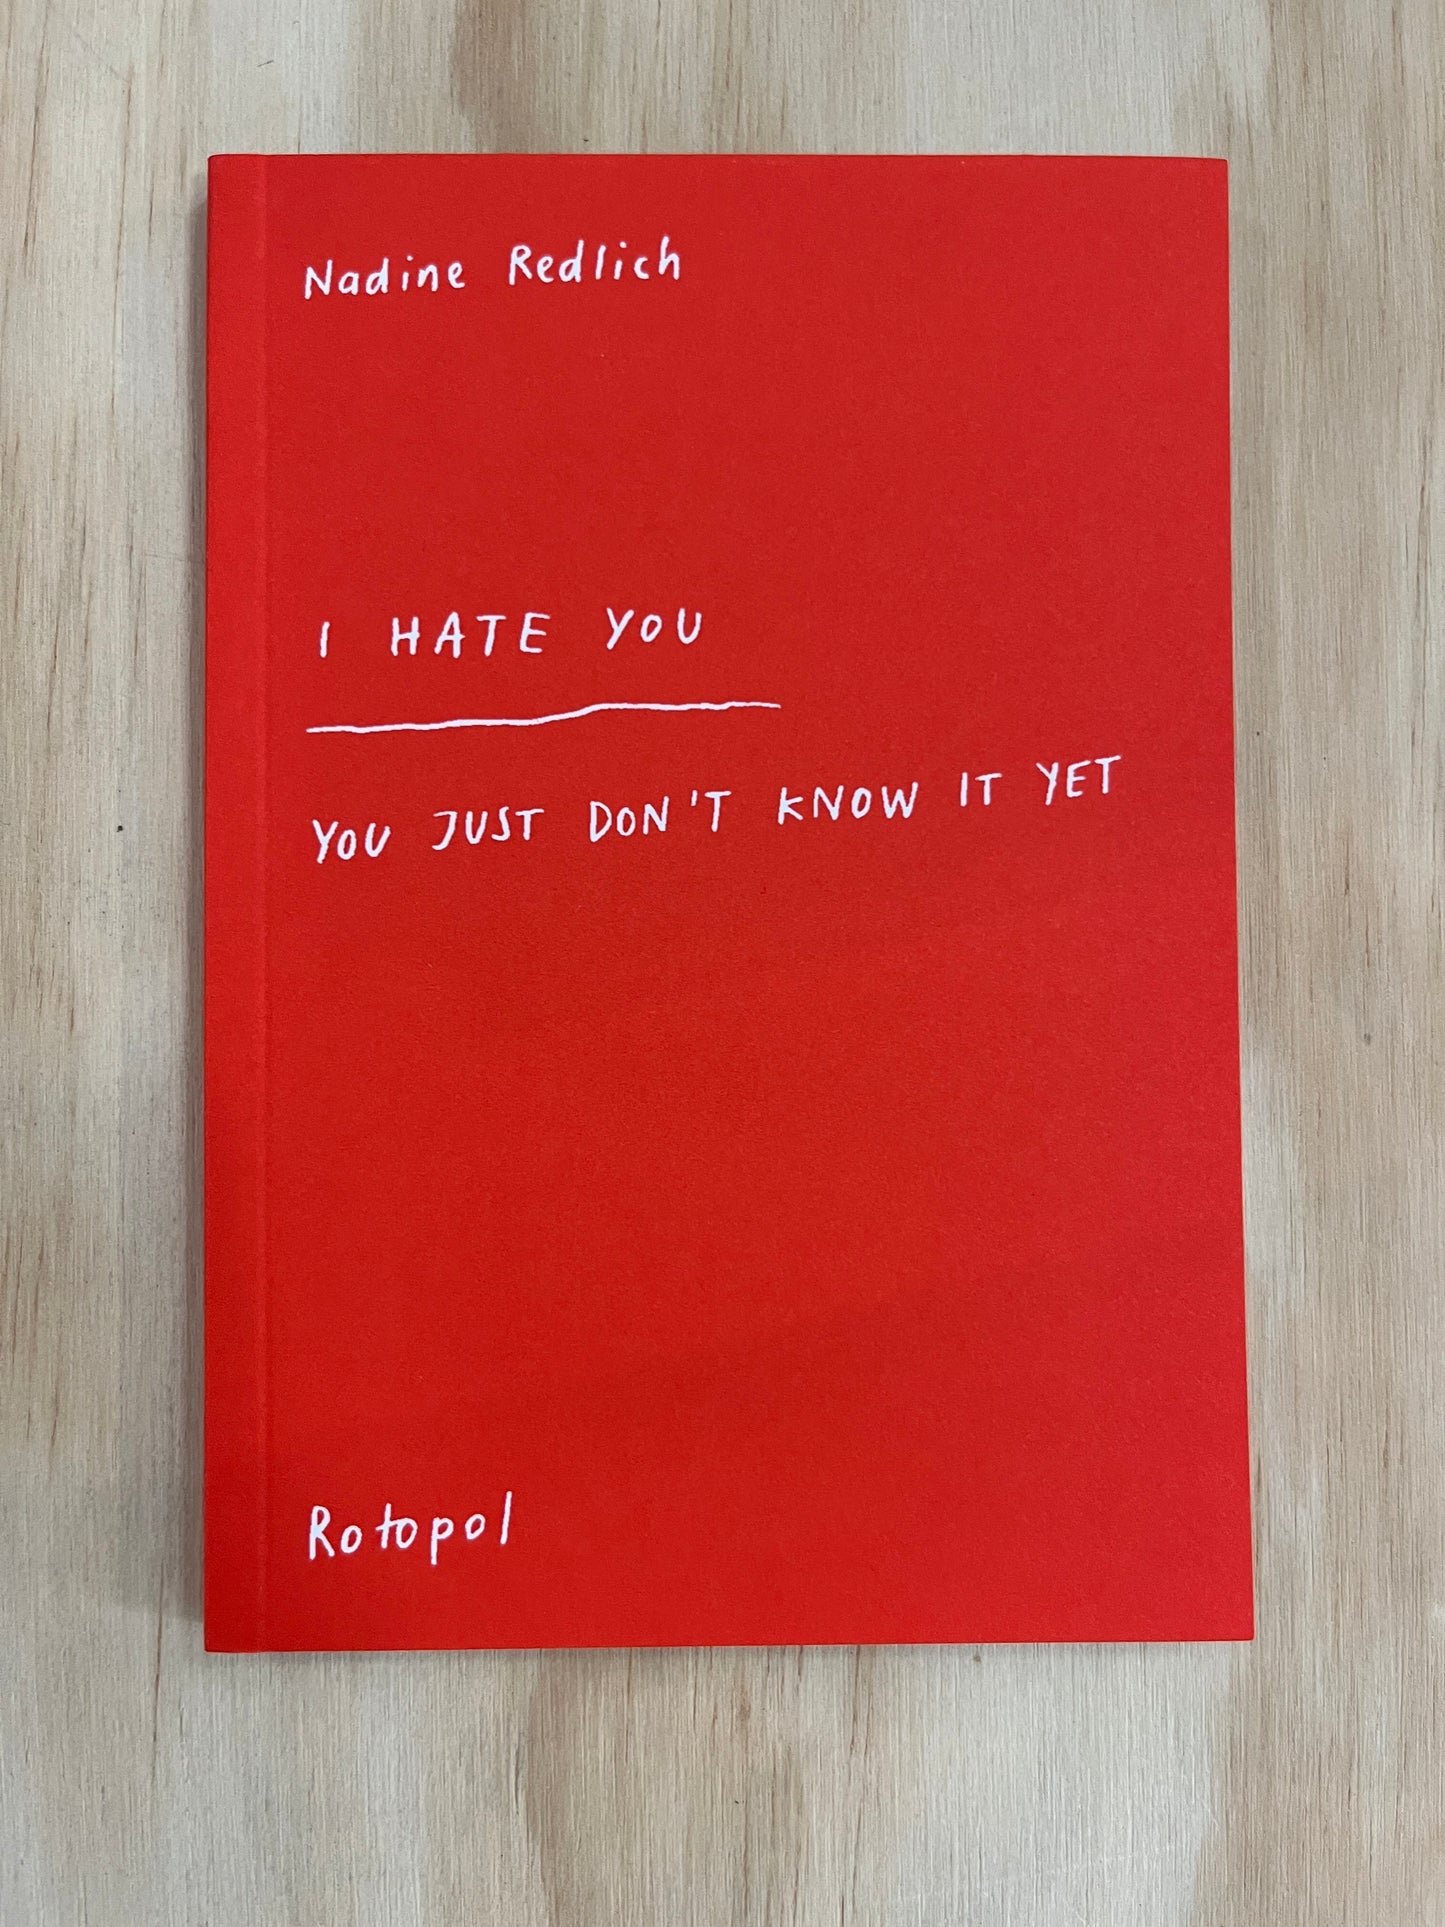 I HATE YOU – YOU JUST DON’T KNOW IT YET